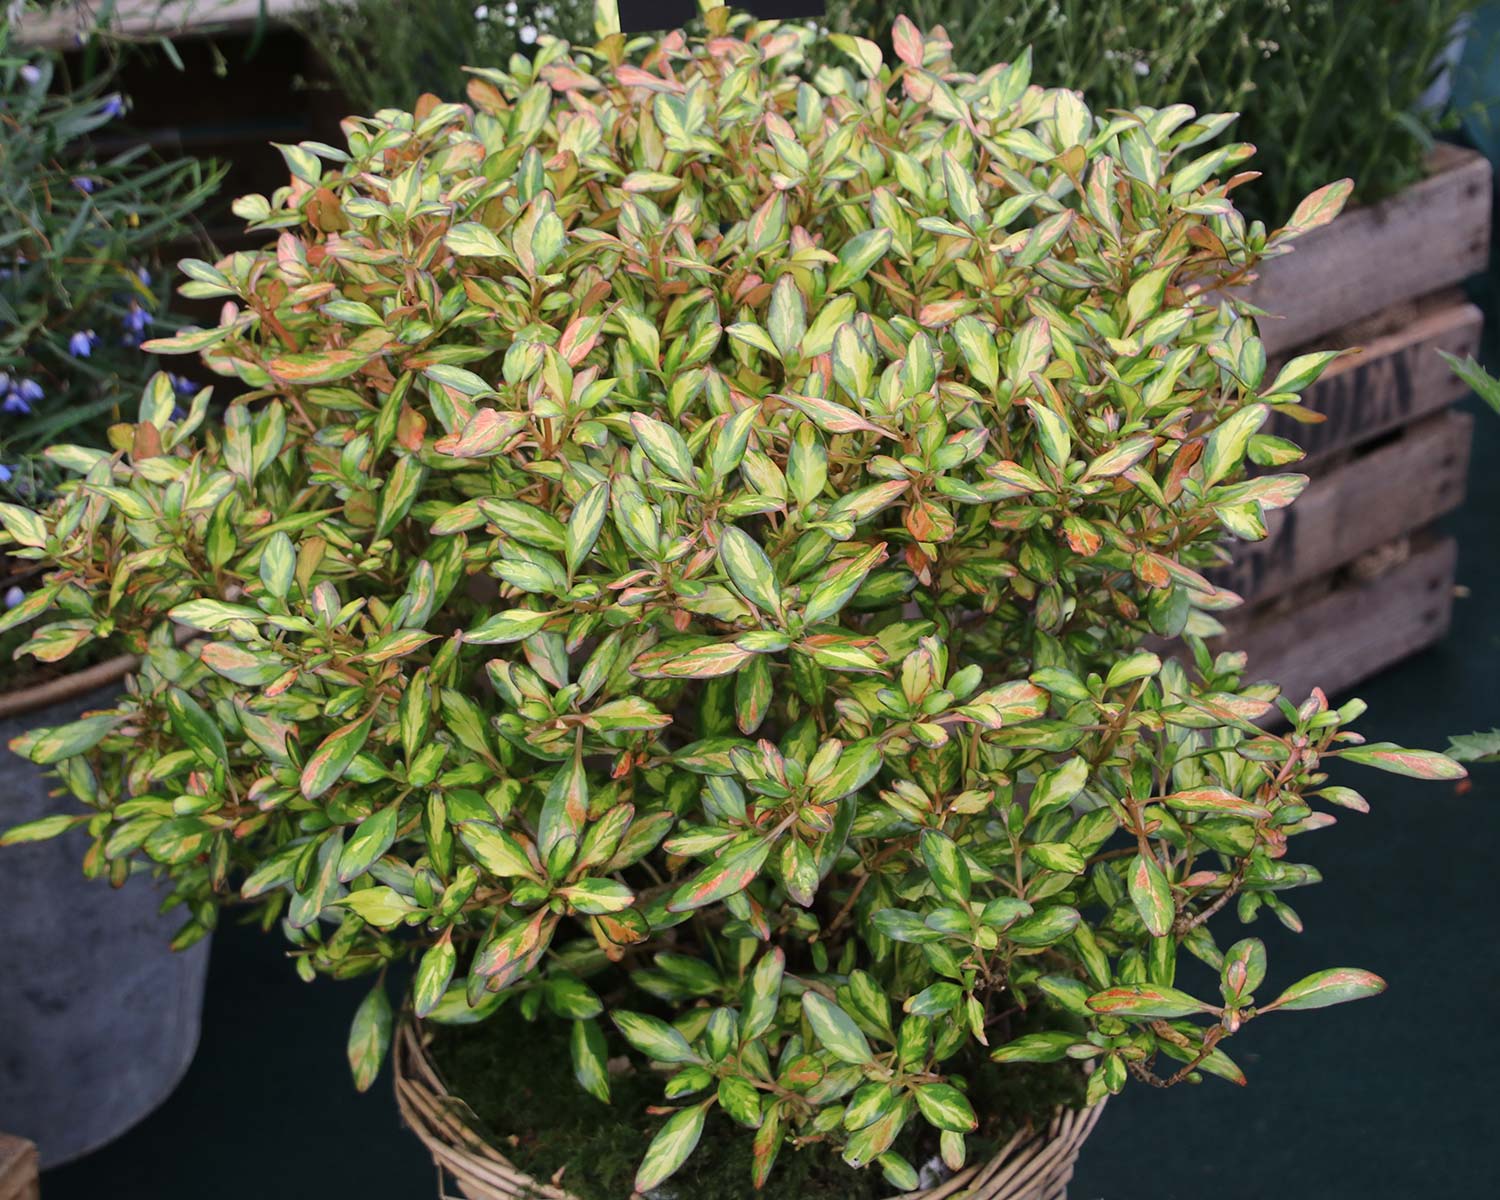 Coprosma 'Evening Glow' - leaves turn deeper orange and pink in autumn and winter